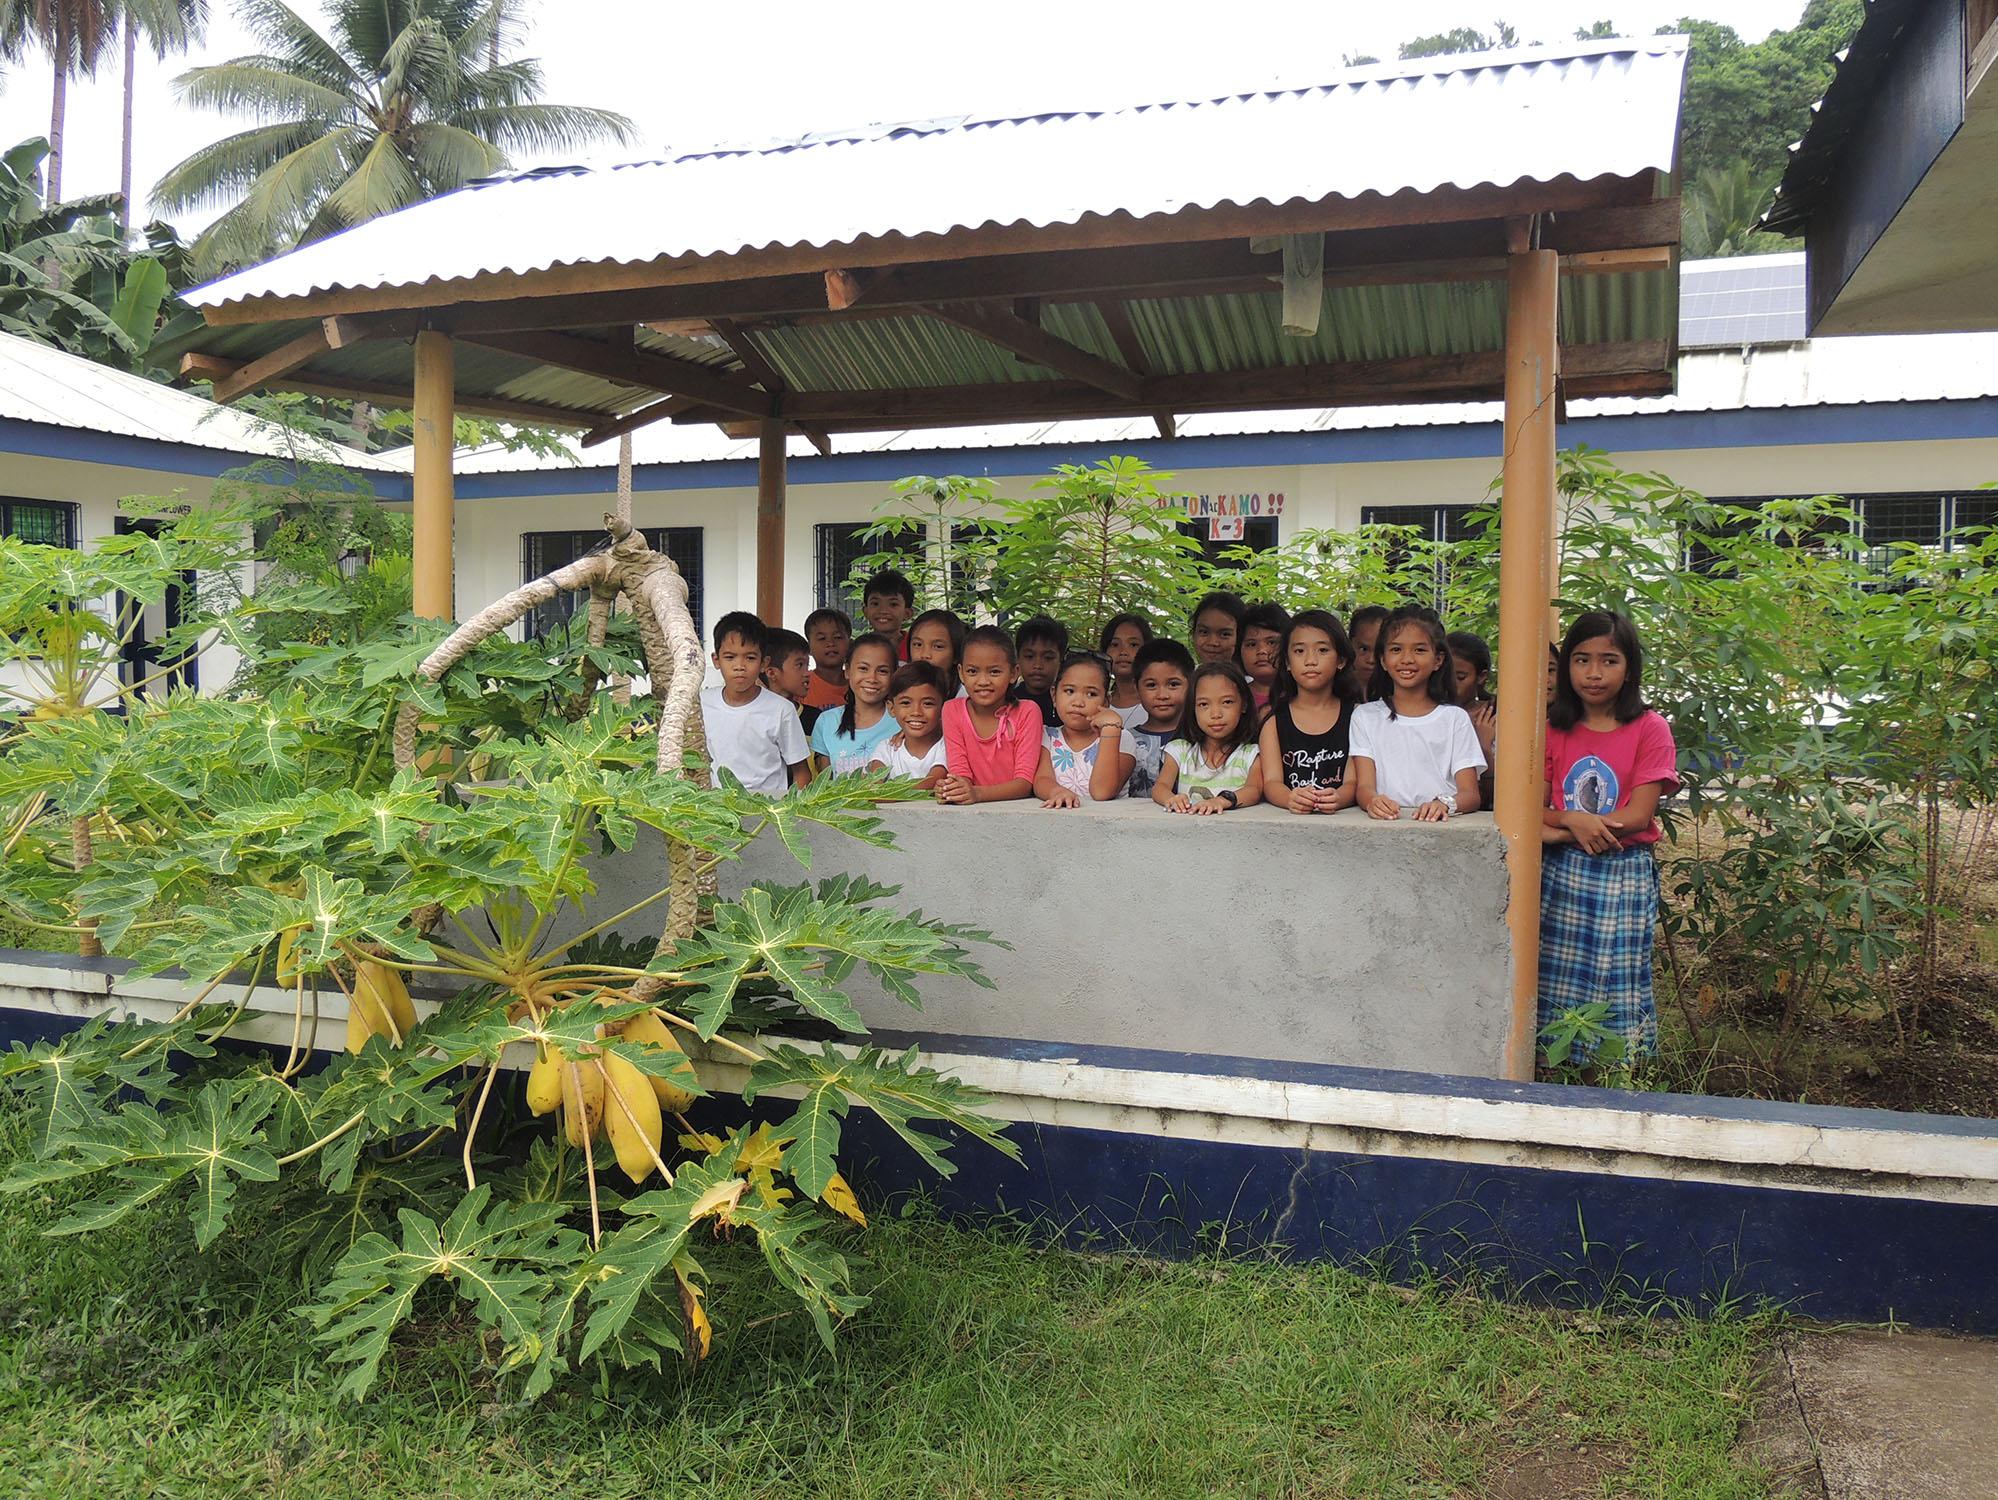 San Roque Elementary School – A new greenhouse -Educational Project of the Child & Family Foundation